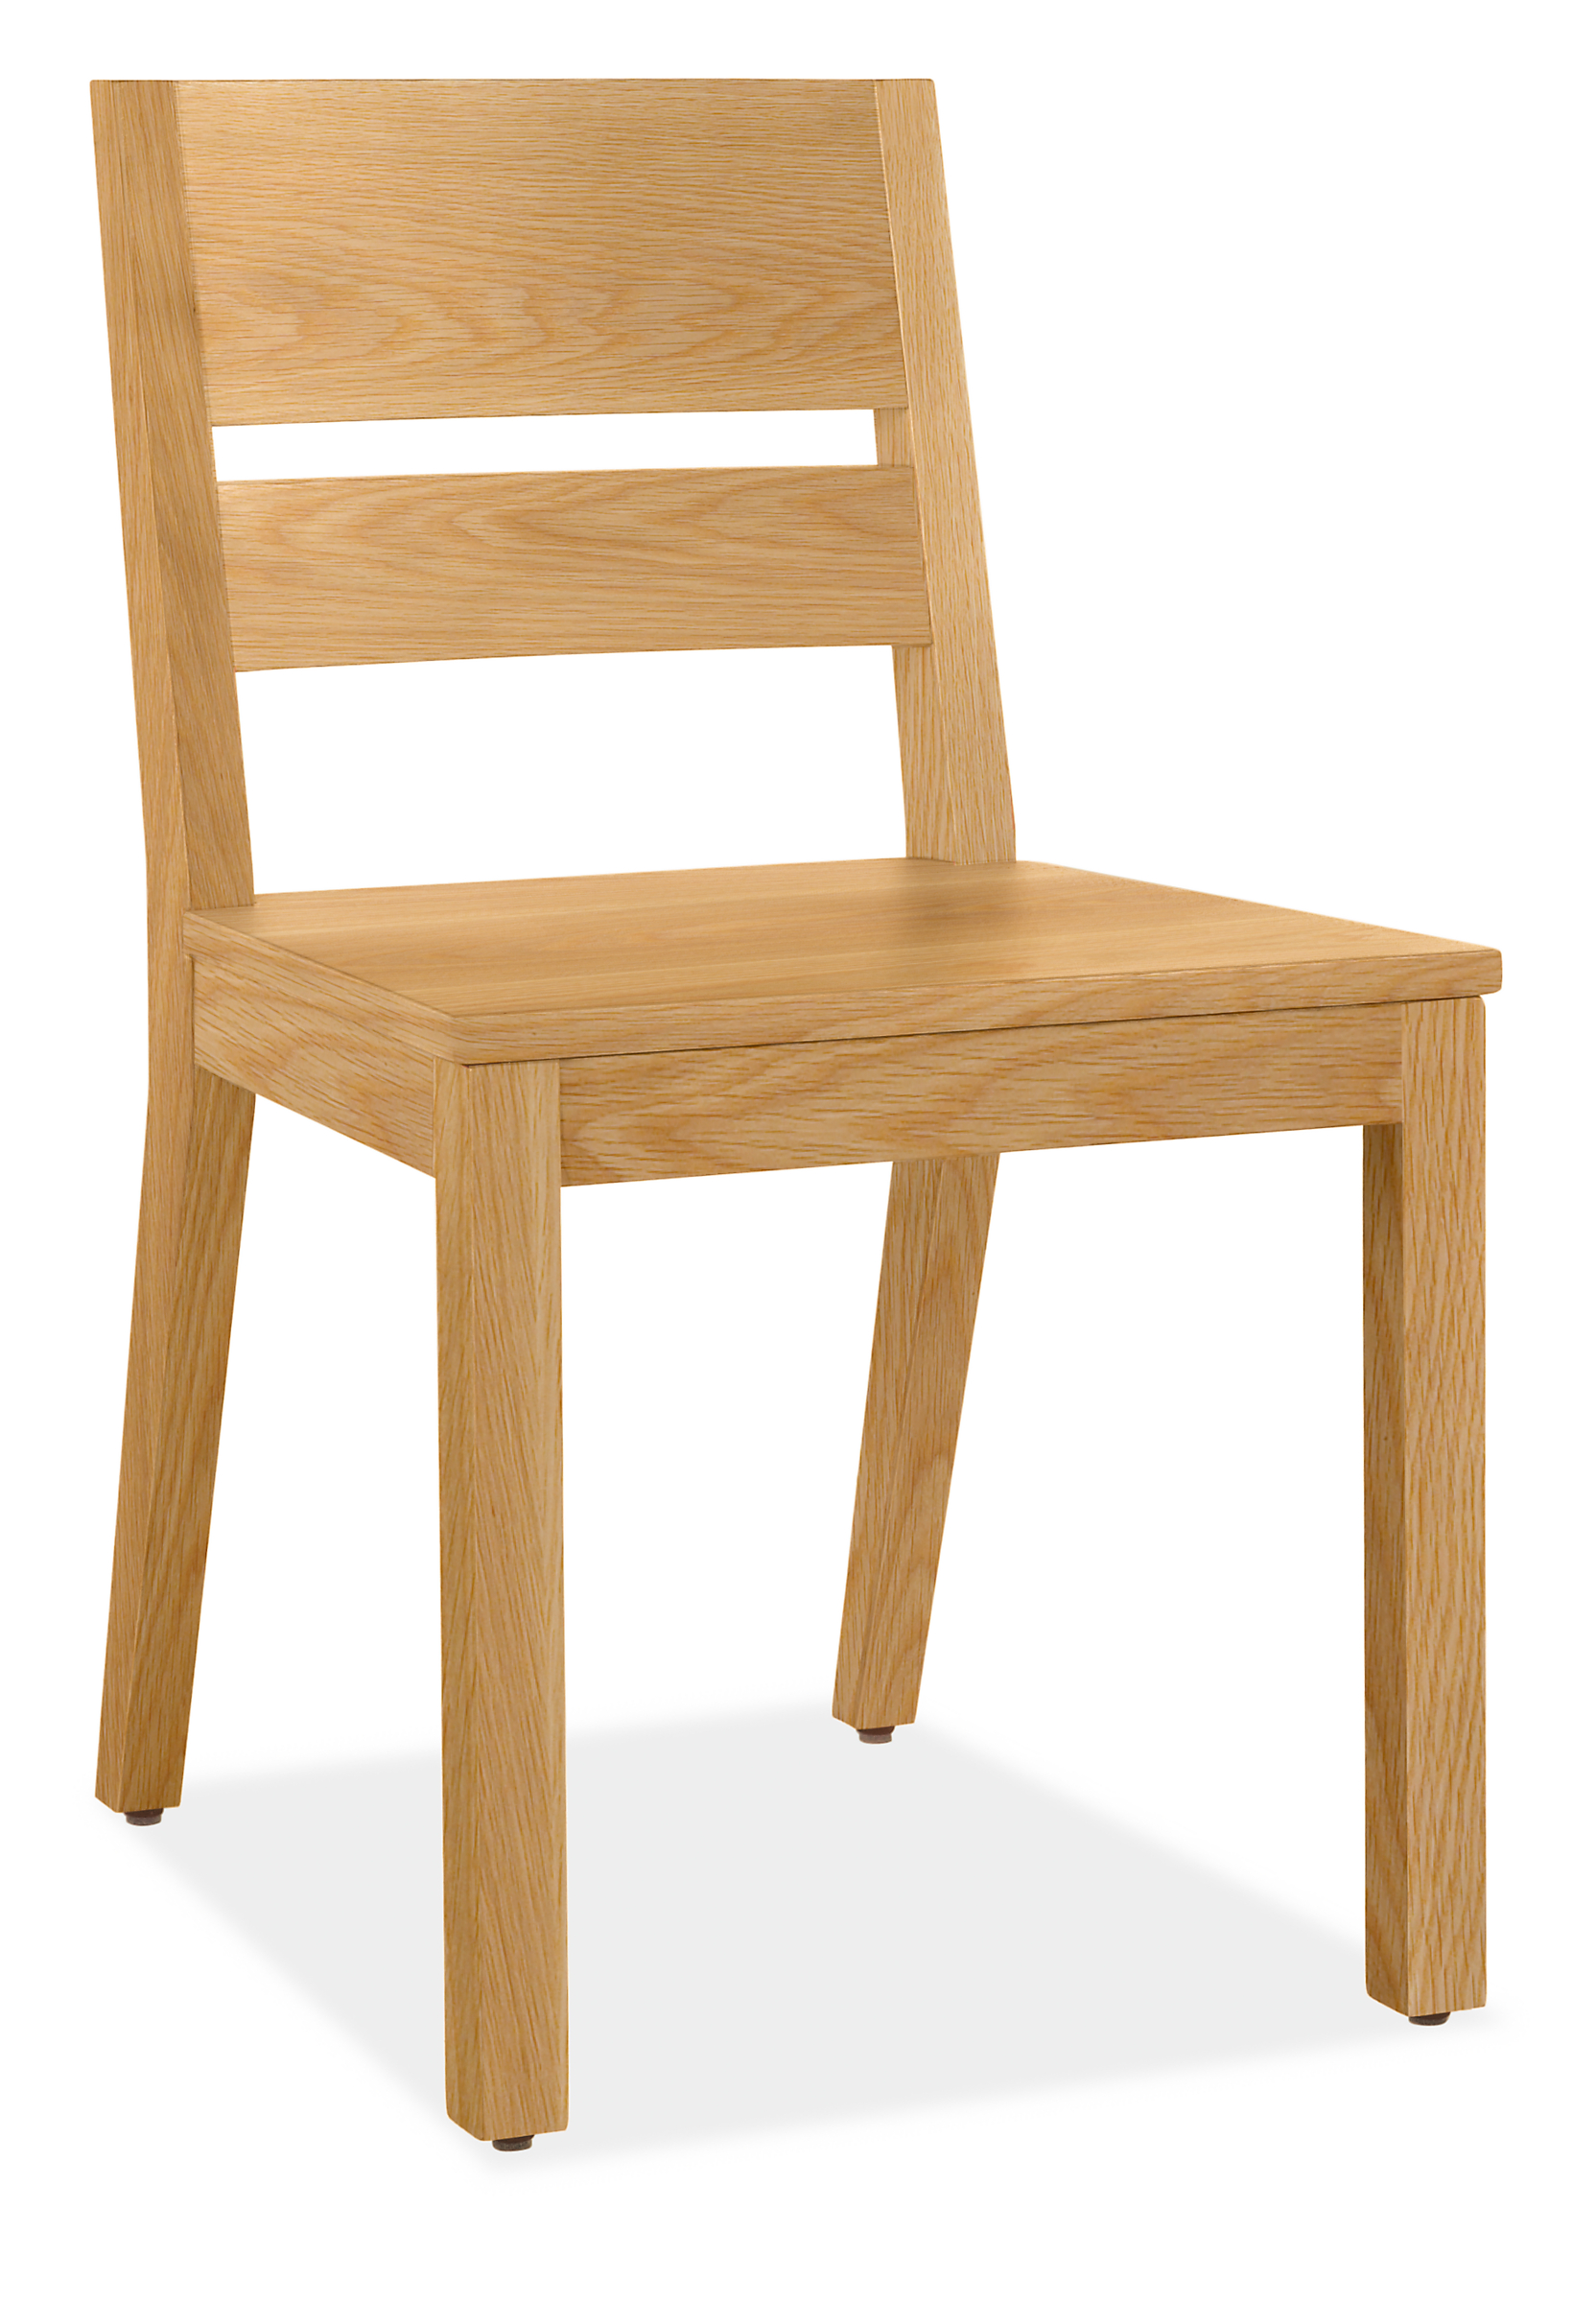 Afton Wood Chairs